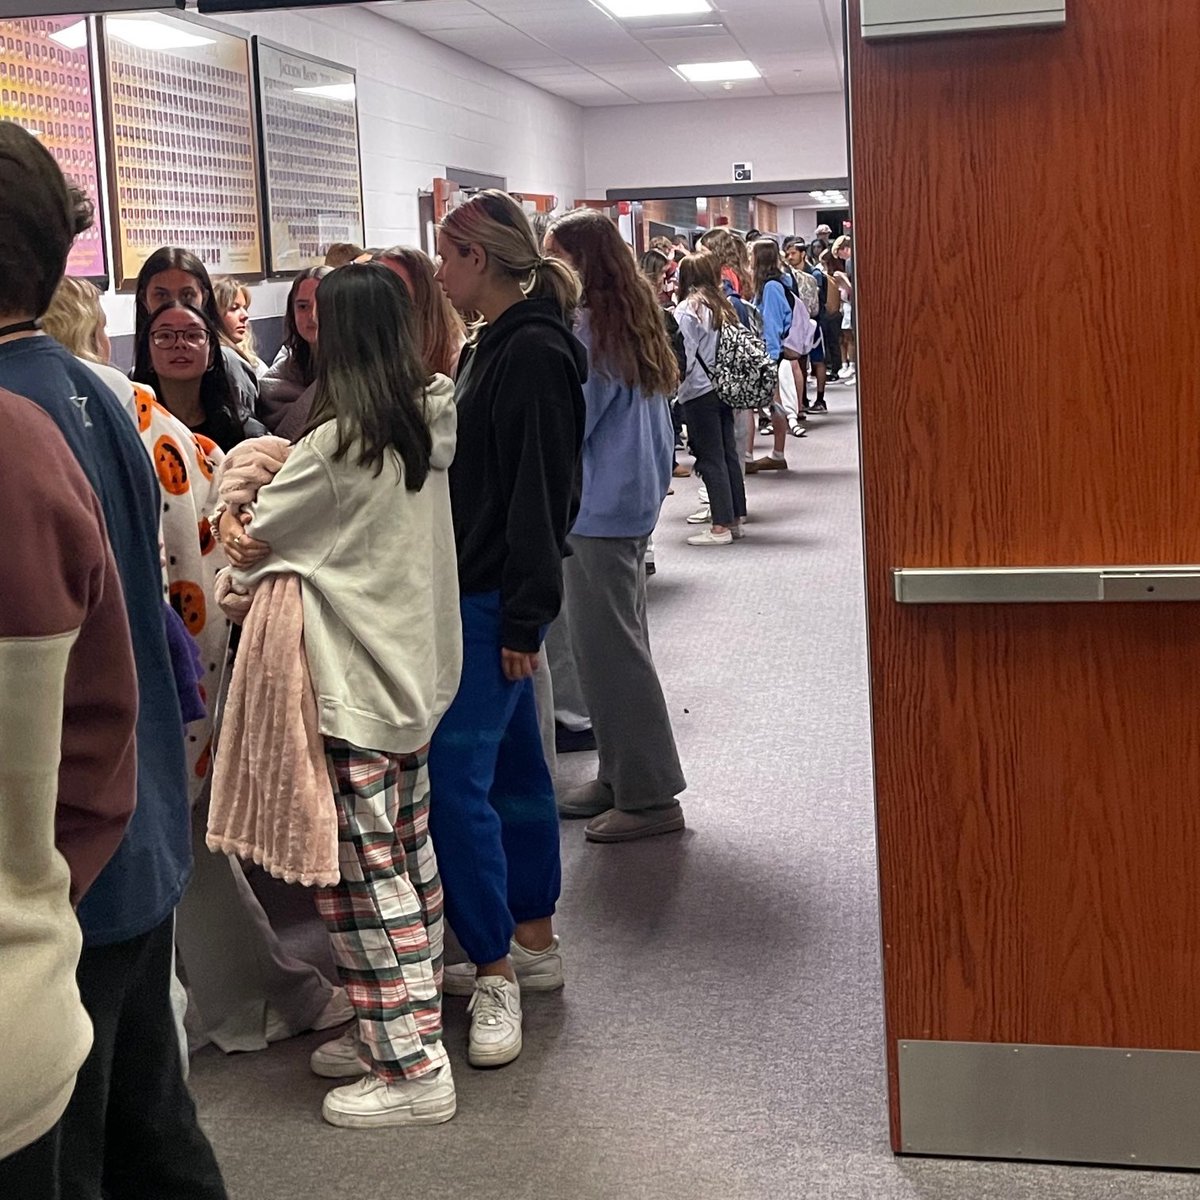 🌟 Over 300 seniors at Jackson Local were up to sign up for Senior Service Day (some as early as 4 AM0, ready to put in nearly 1,300 hours across Jackson Township and Stark County next month. From mulching to improving public spaces, Class of 2024 is on it! 🎓👏 #PolarBearPride